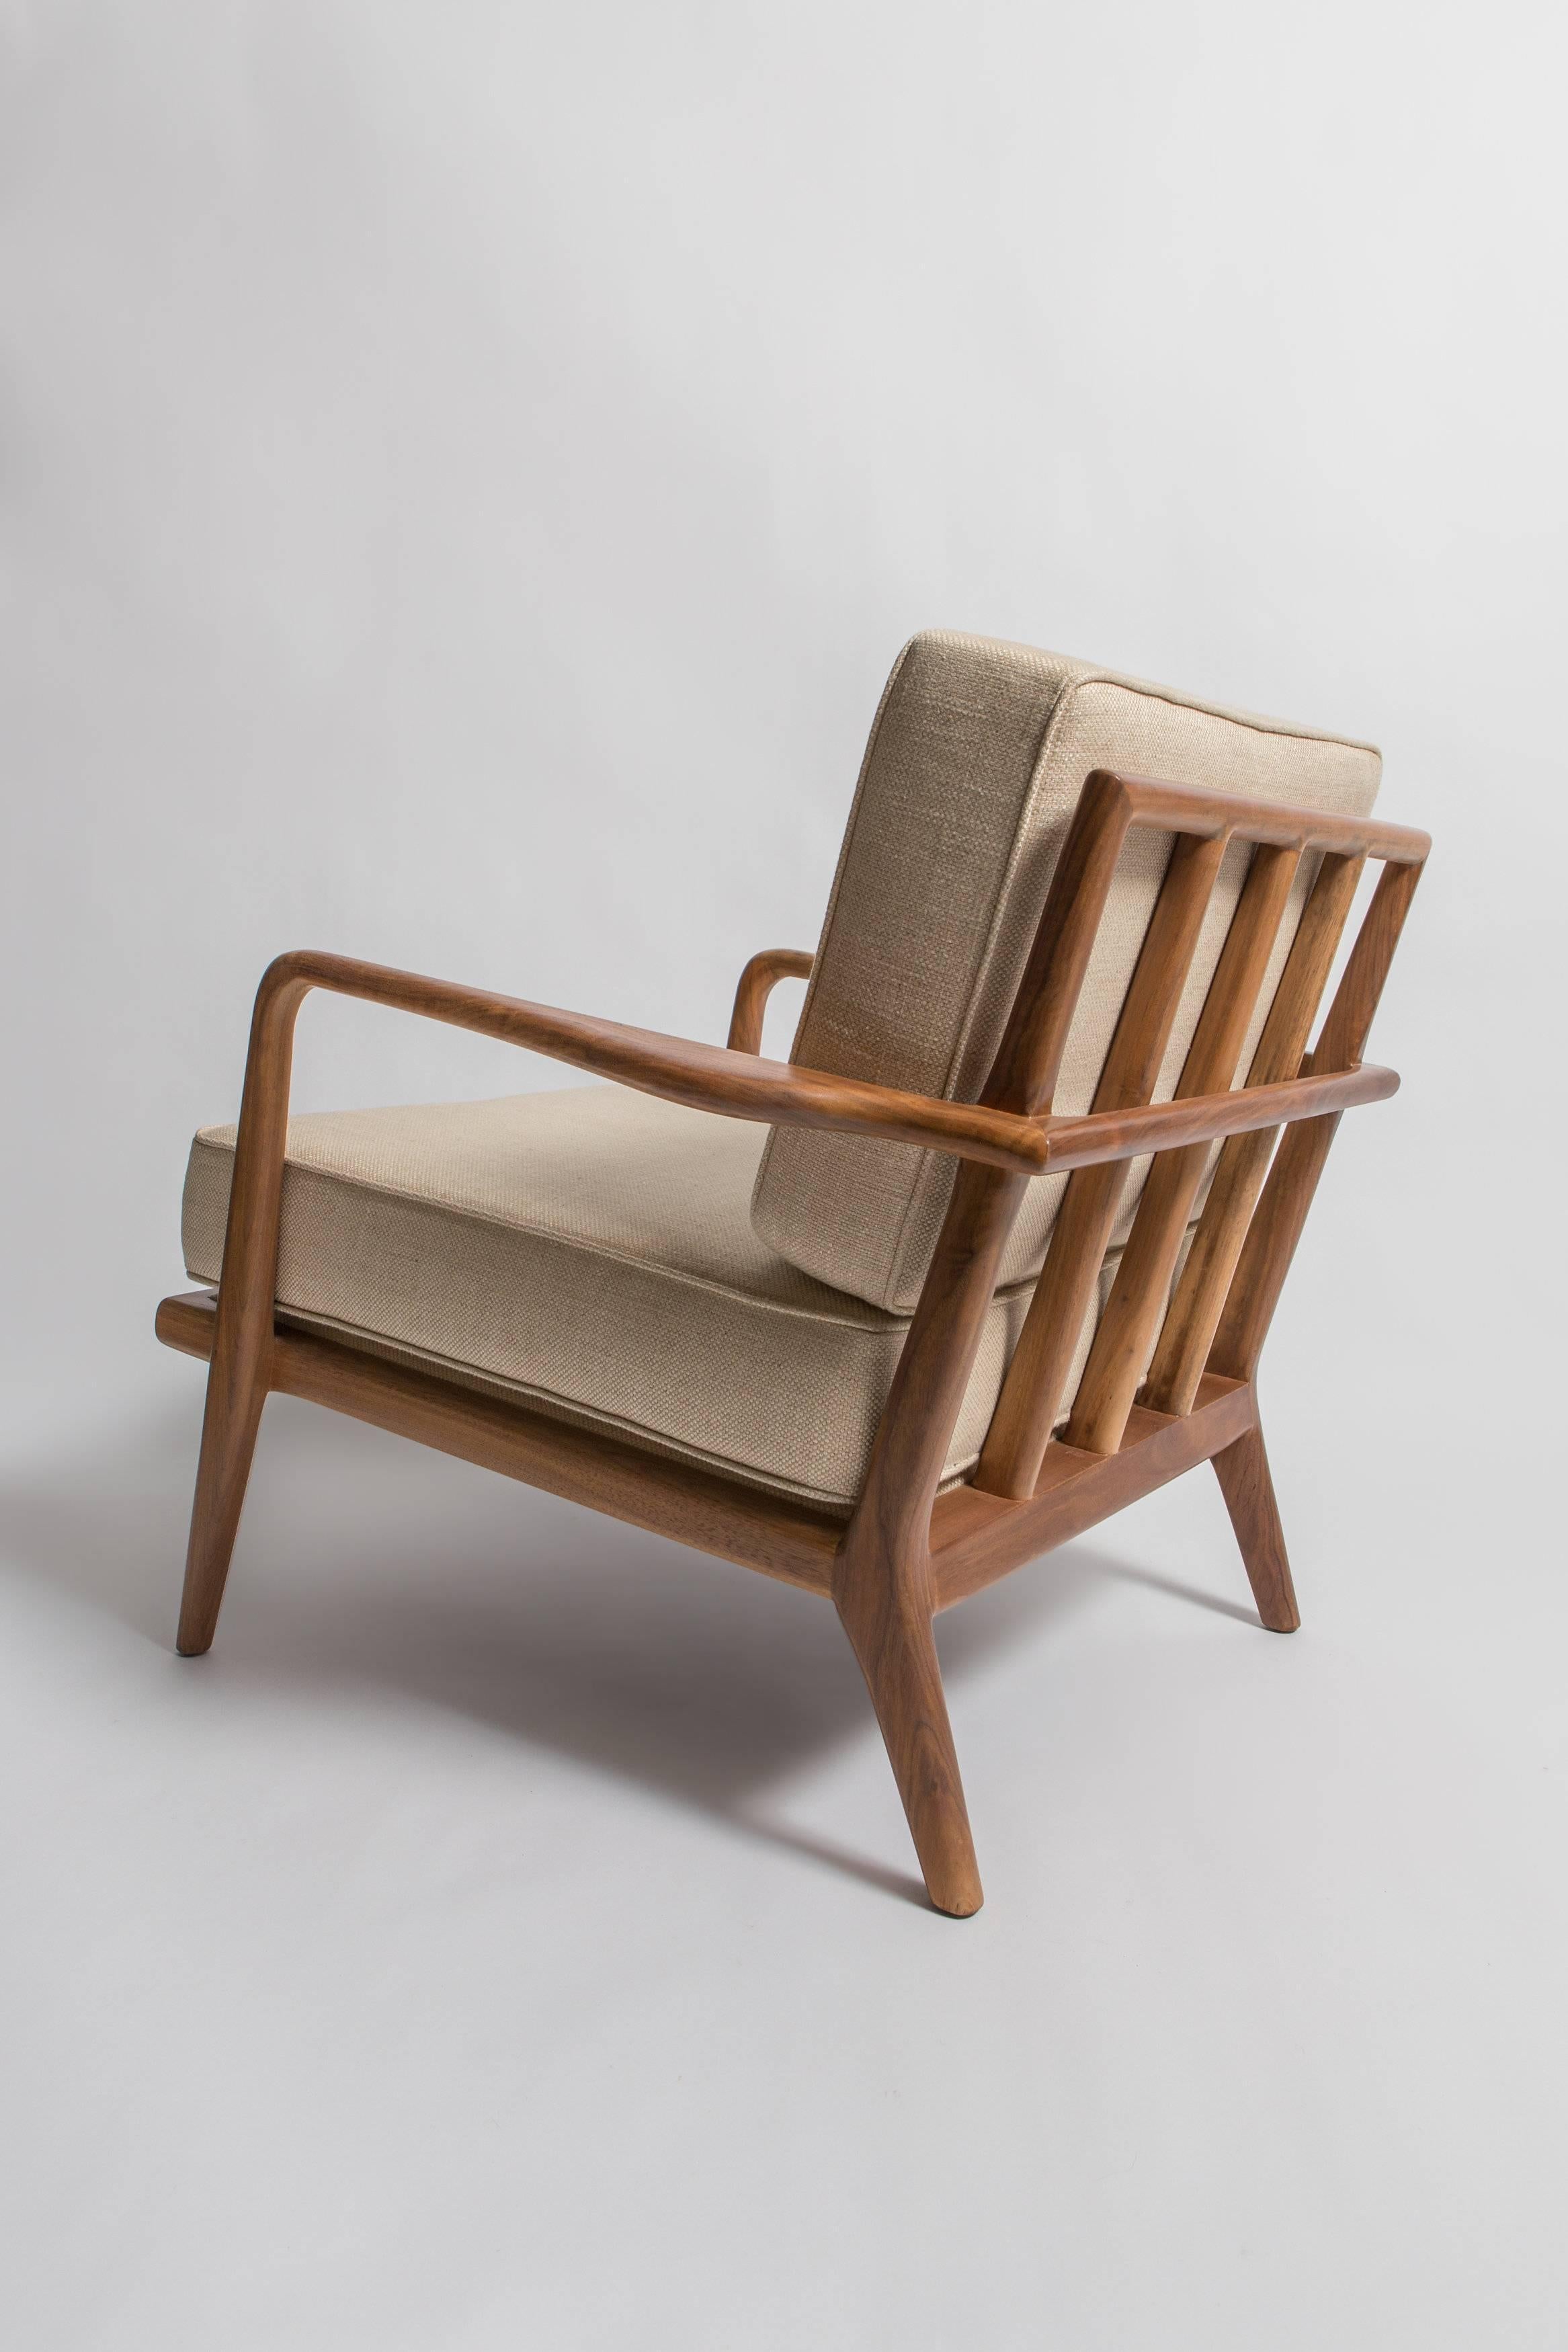 Mid-20th Century Vintage, 1950s, Solid Walnut Mel Smilow Railback Lounge Chair in Cream Linen For Sale